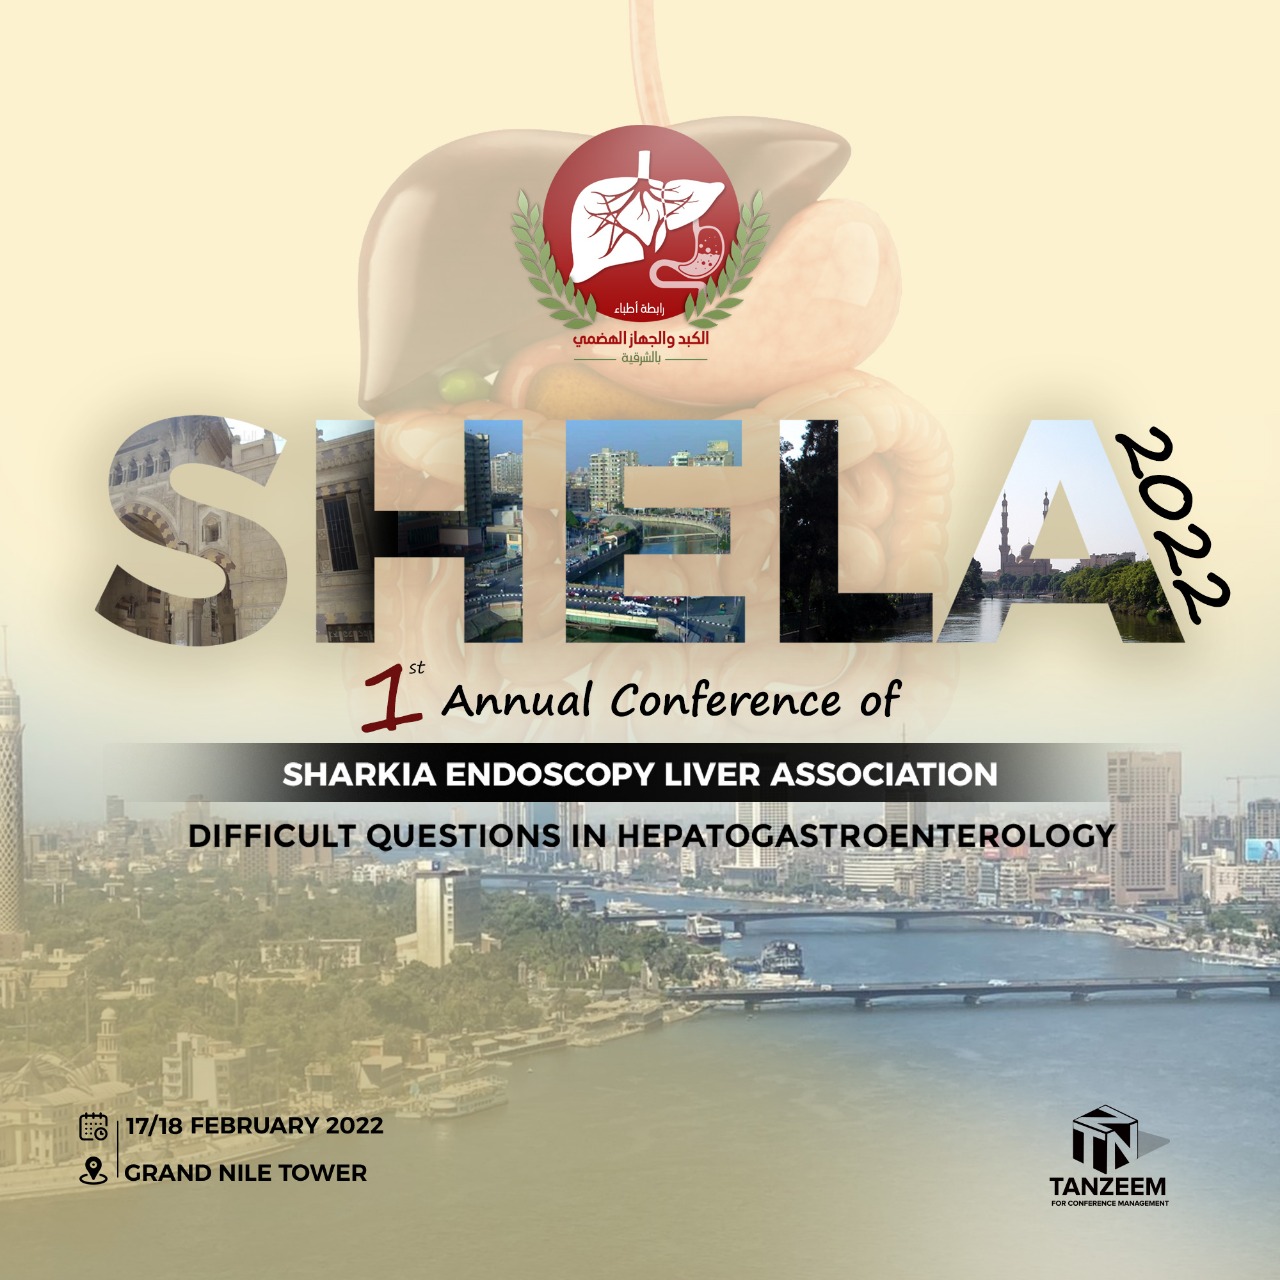 1st Annual Conference of Sharkia Endoscopy Liver Association